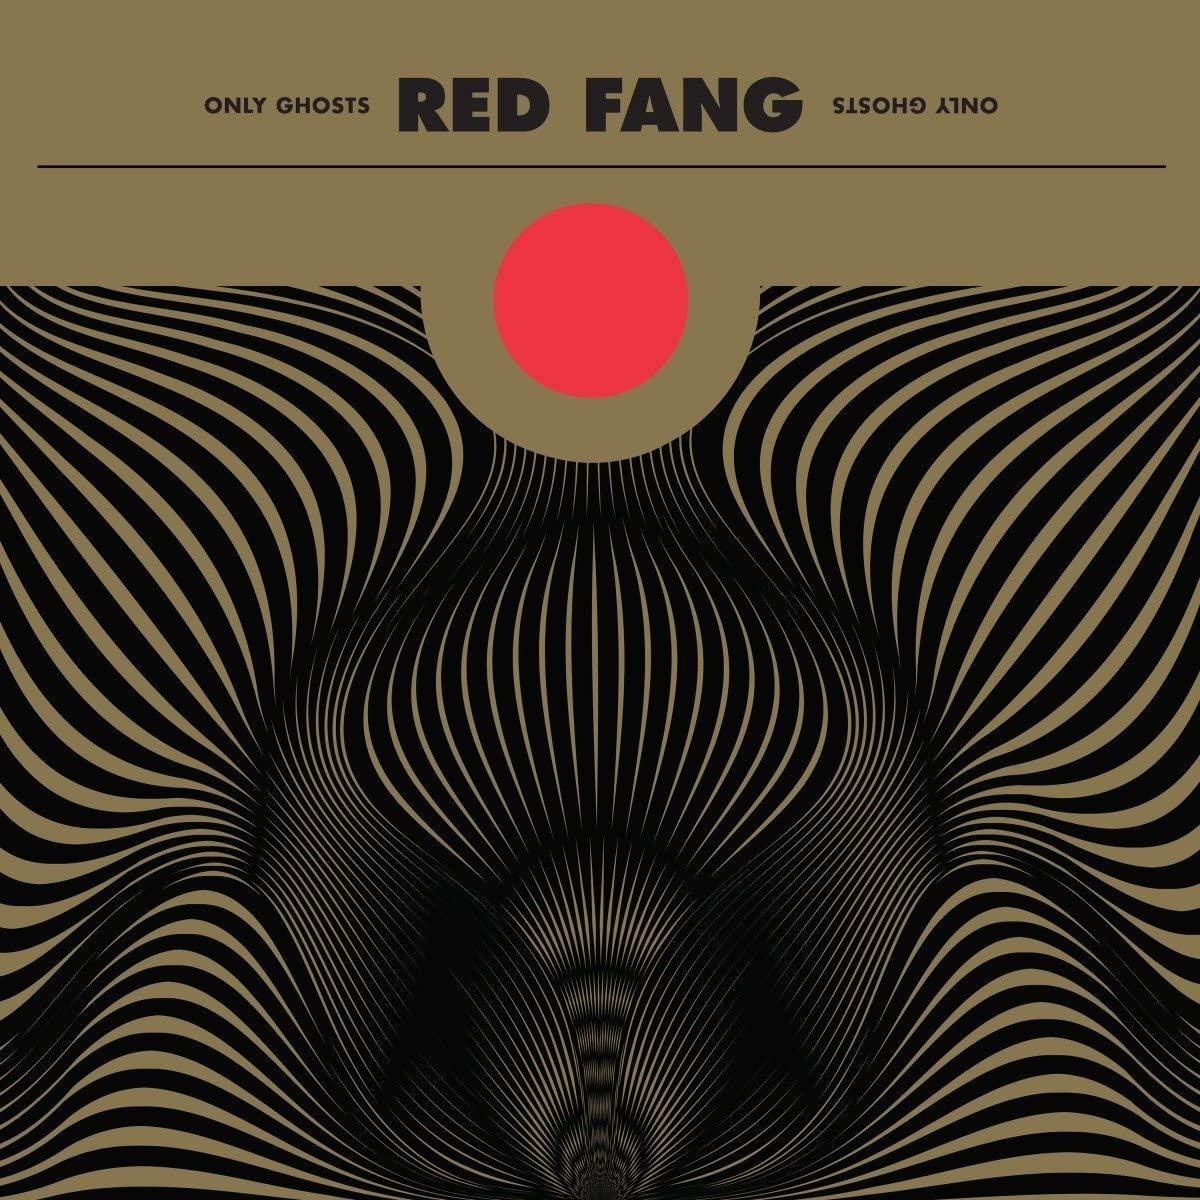 Red Fang/Only Ghosts [LP]